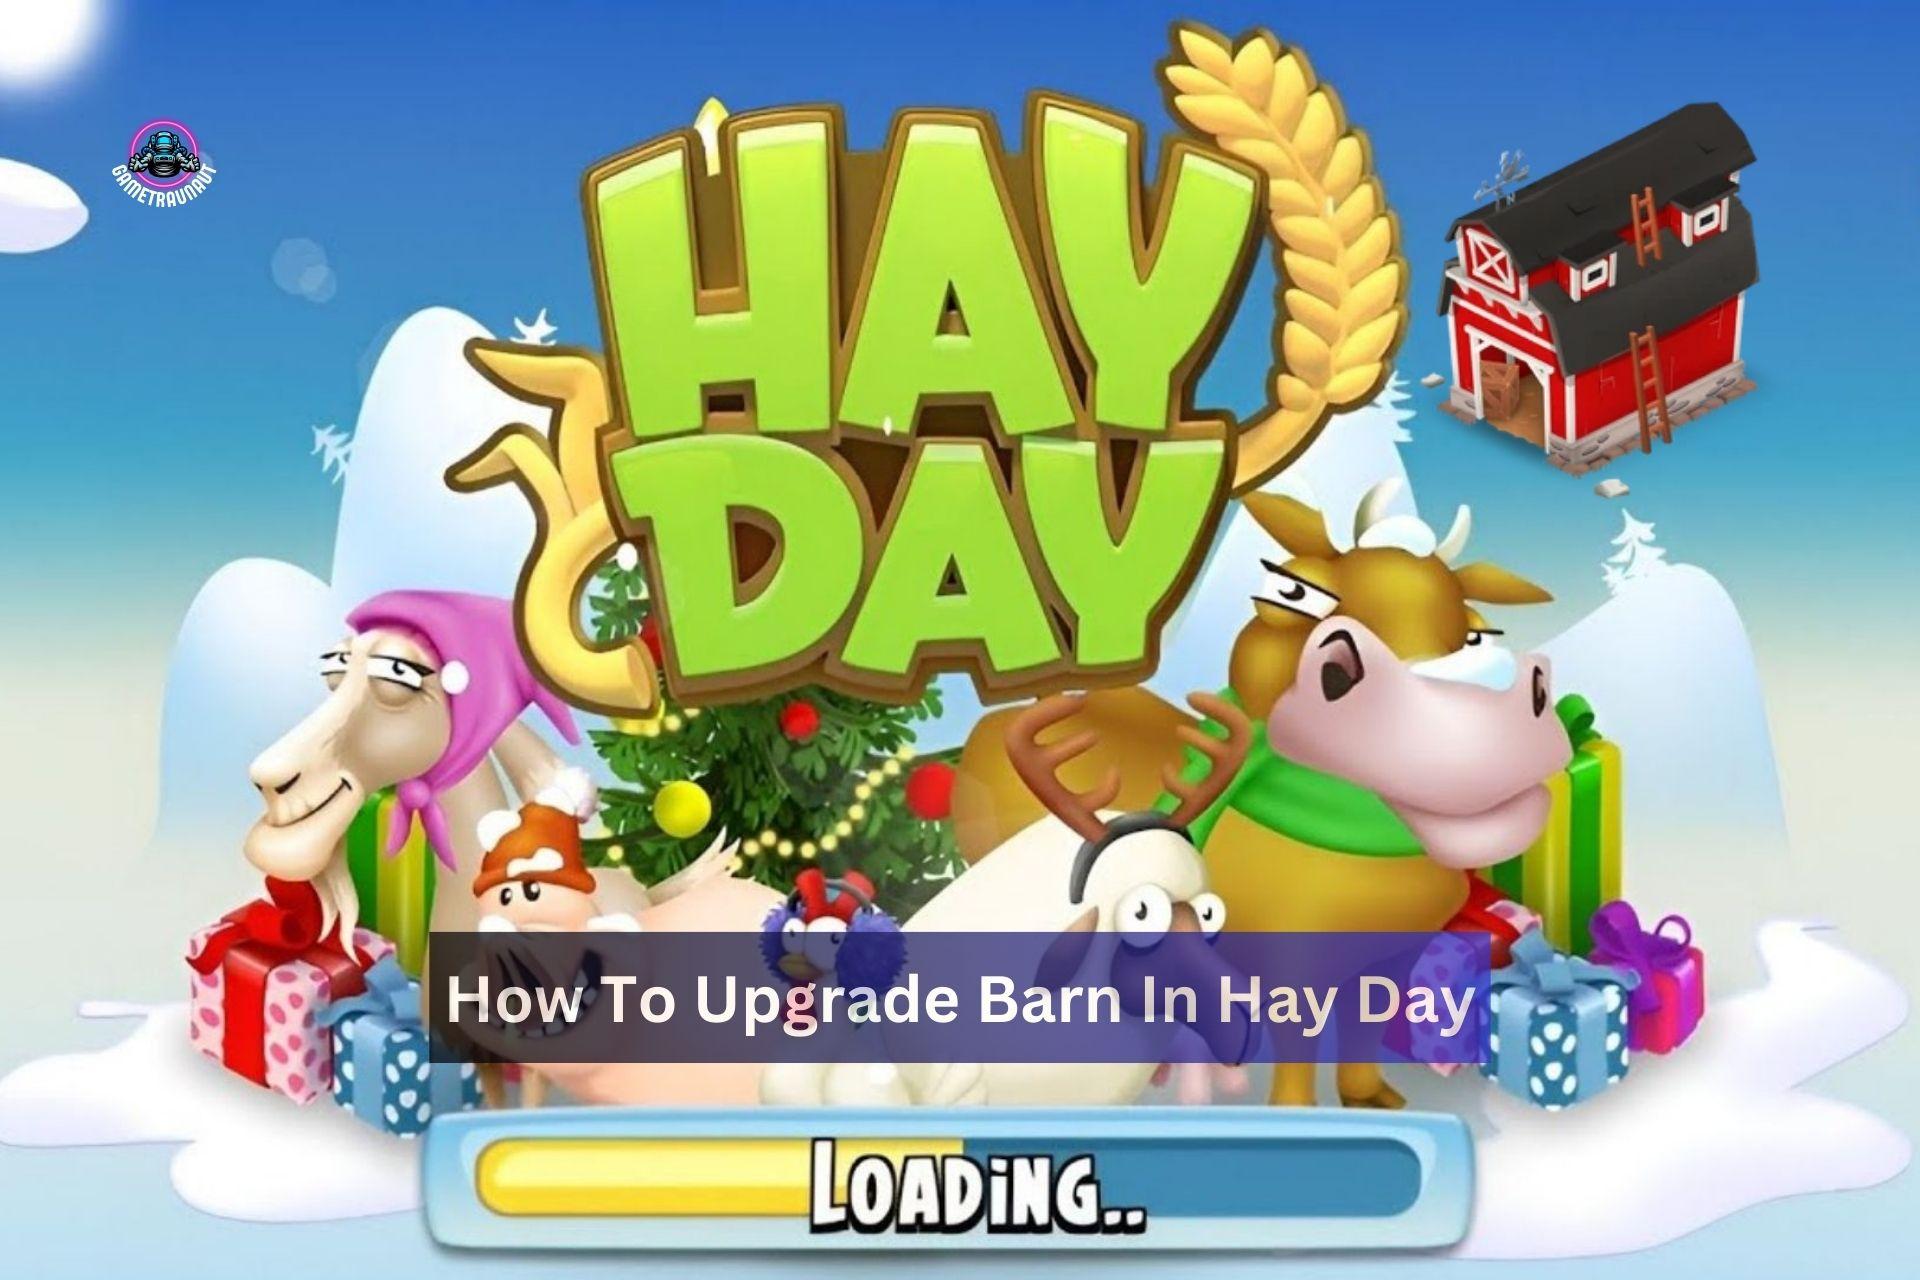 How to upgrade barn in Hay Day